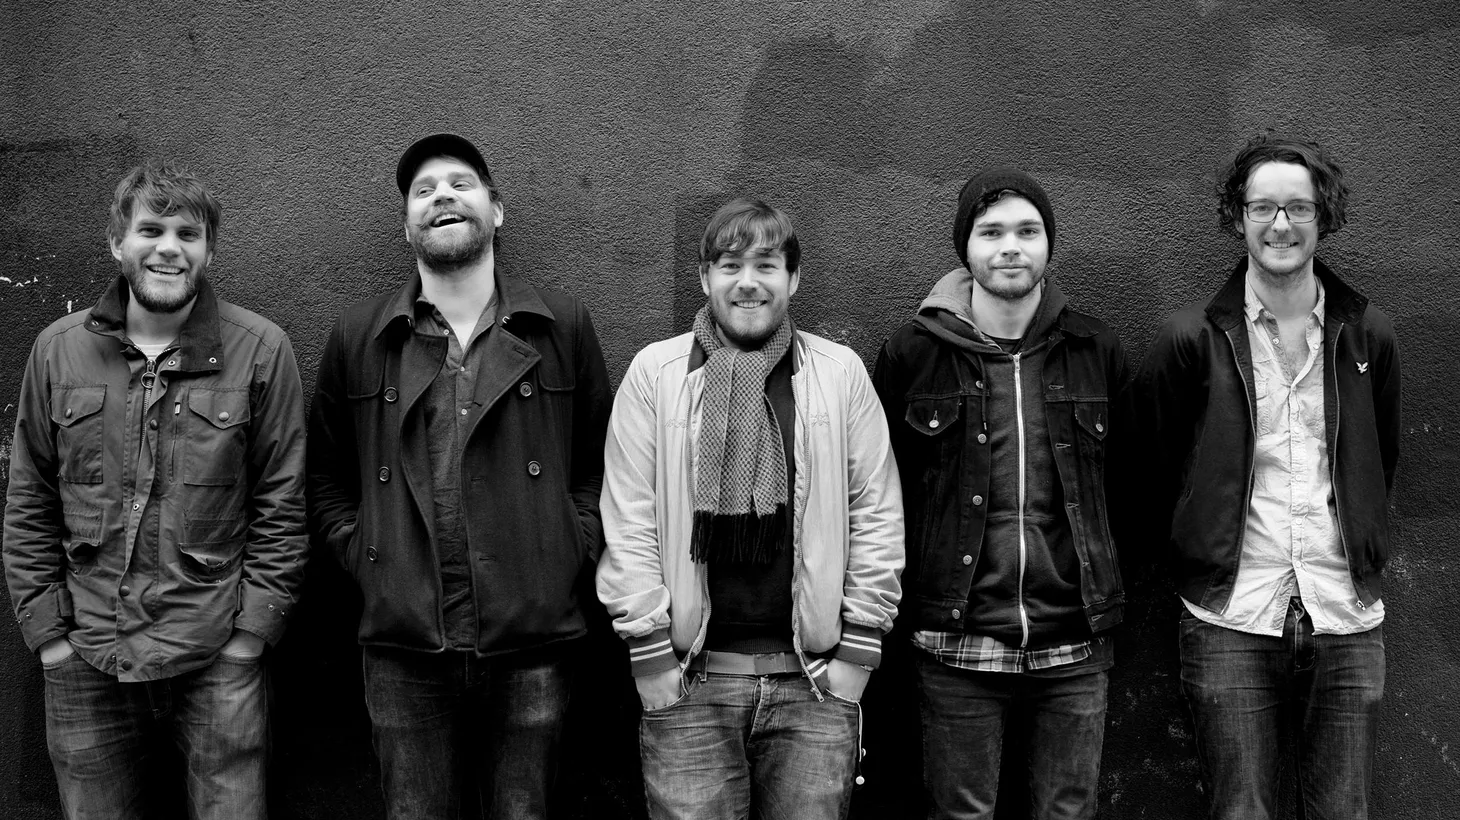 Scottish band Frightened Rabbit have created one of Jason Bentley's favorite albums of the year...